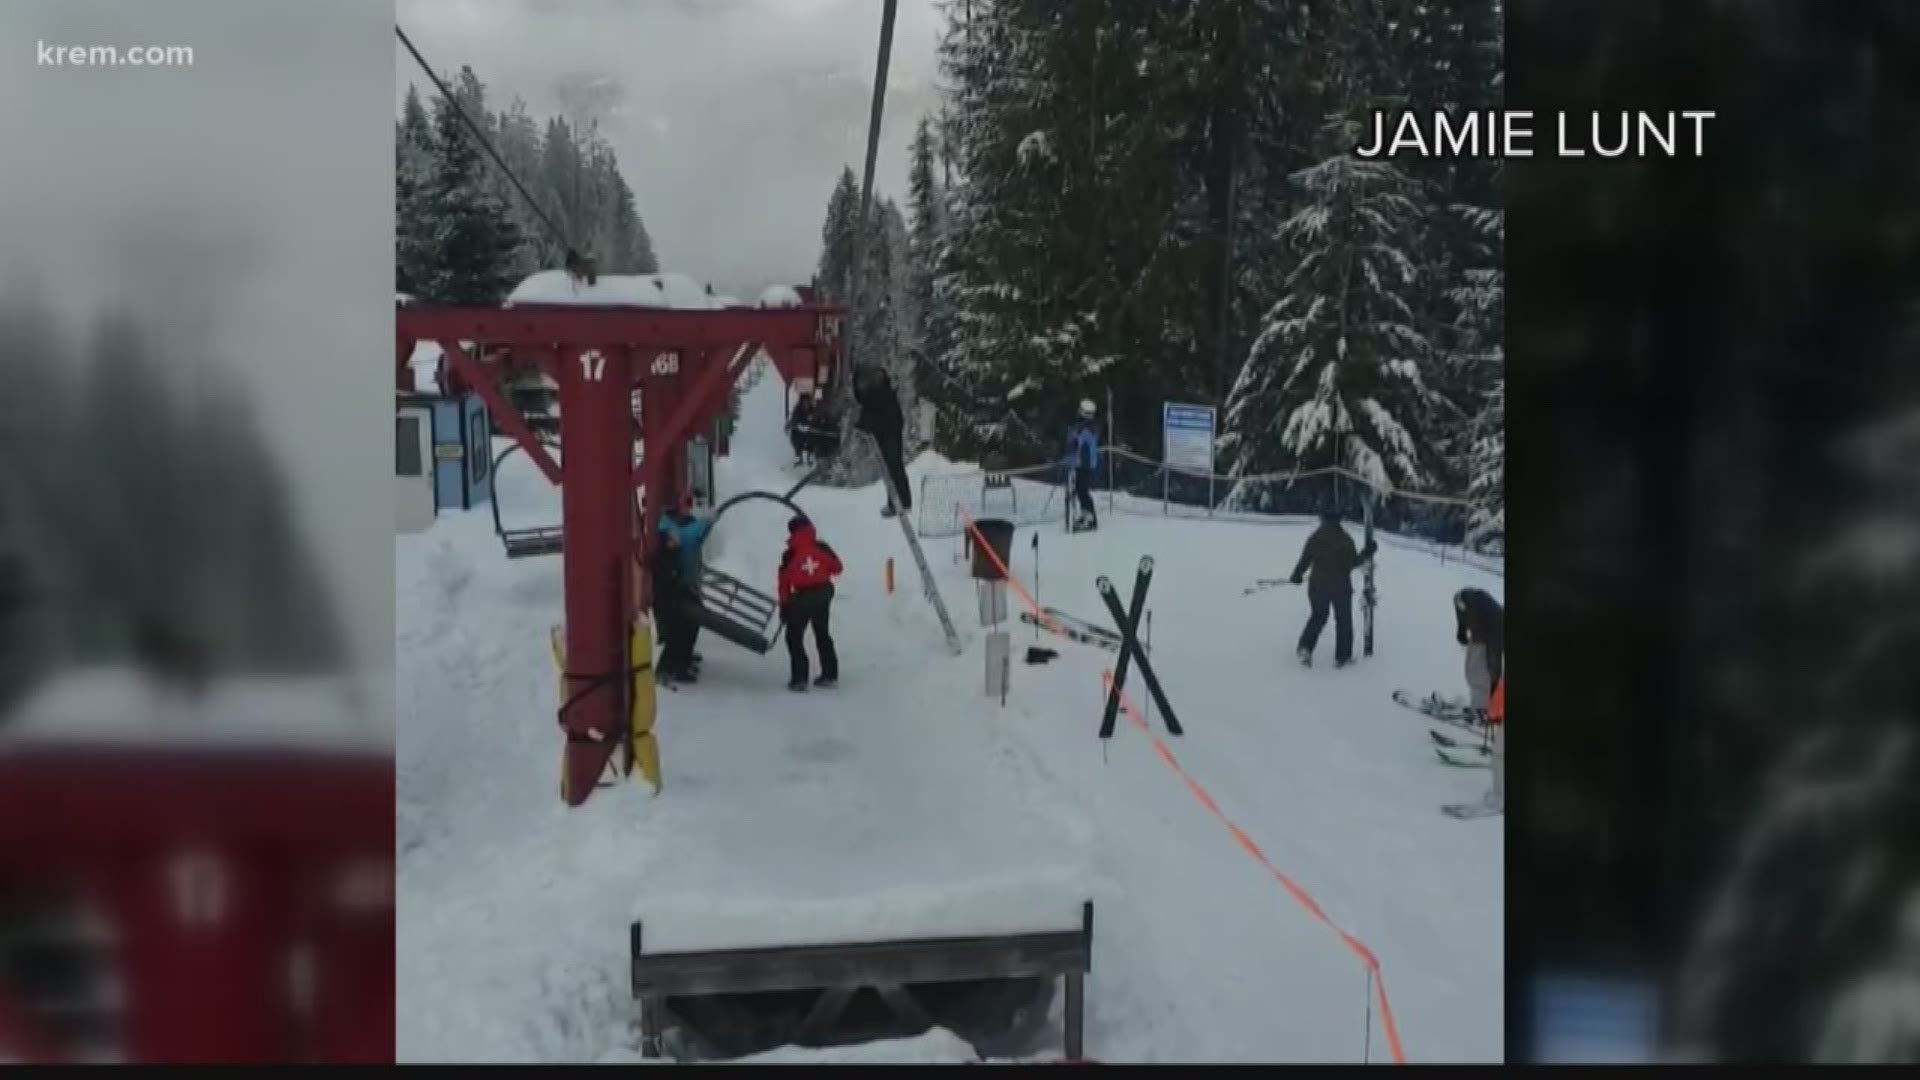 KREM Reporter Amanda Roley spoke with a couple who witnessed a chair fall off of a chairlift at 49 Degrees North. The ski resort said other lifts will be moved in a more “aggressive operational schedule” for the spring season and safety is the resort's number one priority.